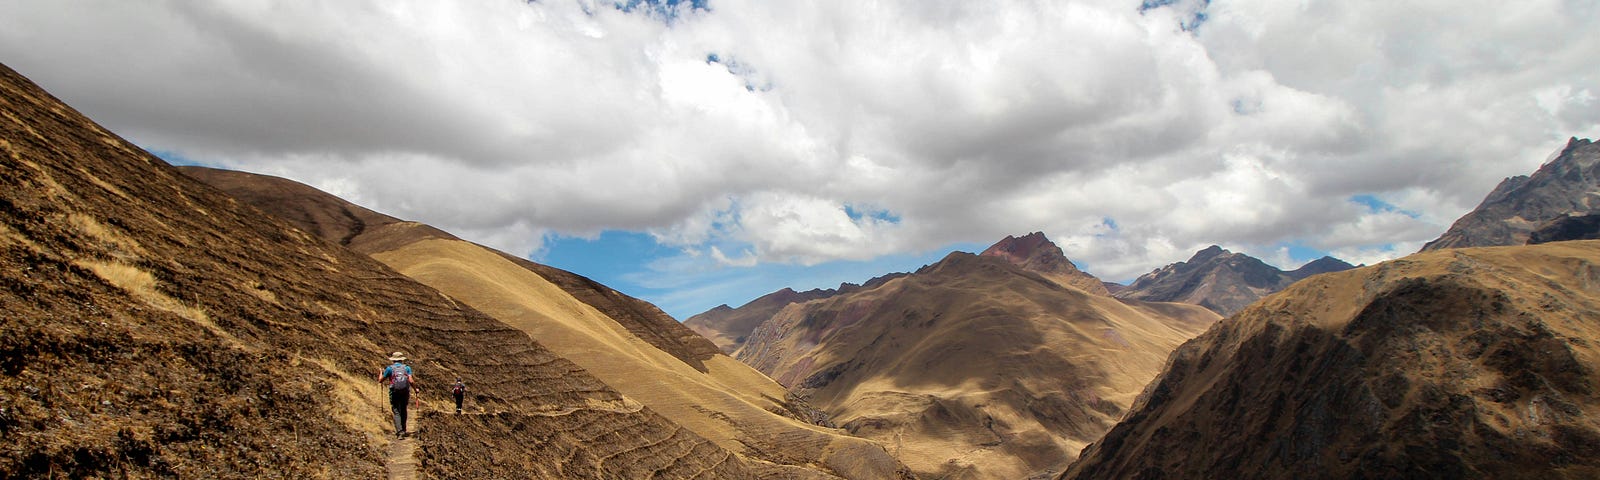 A hiking path high in the Peruvian Andes mountains